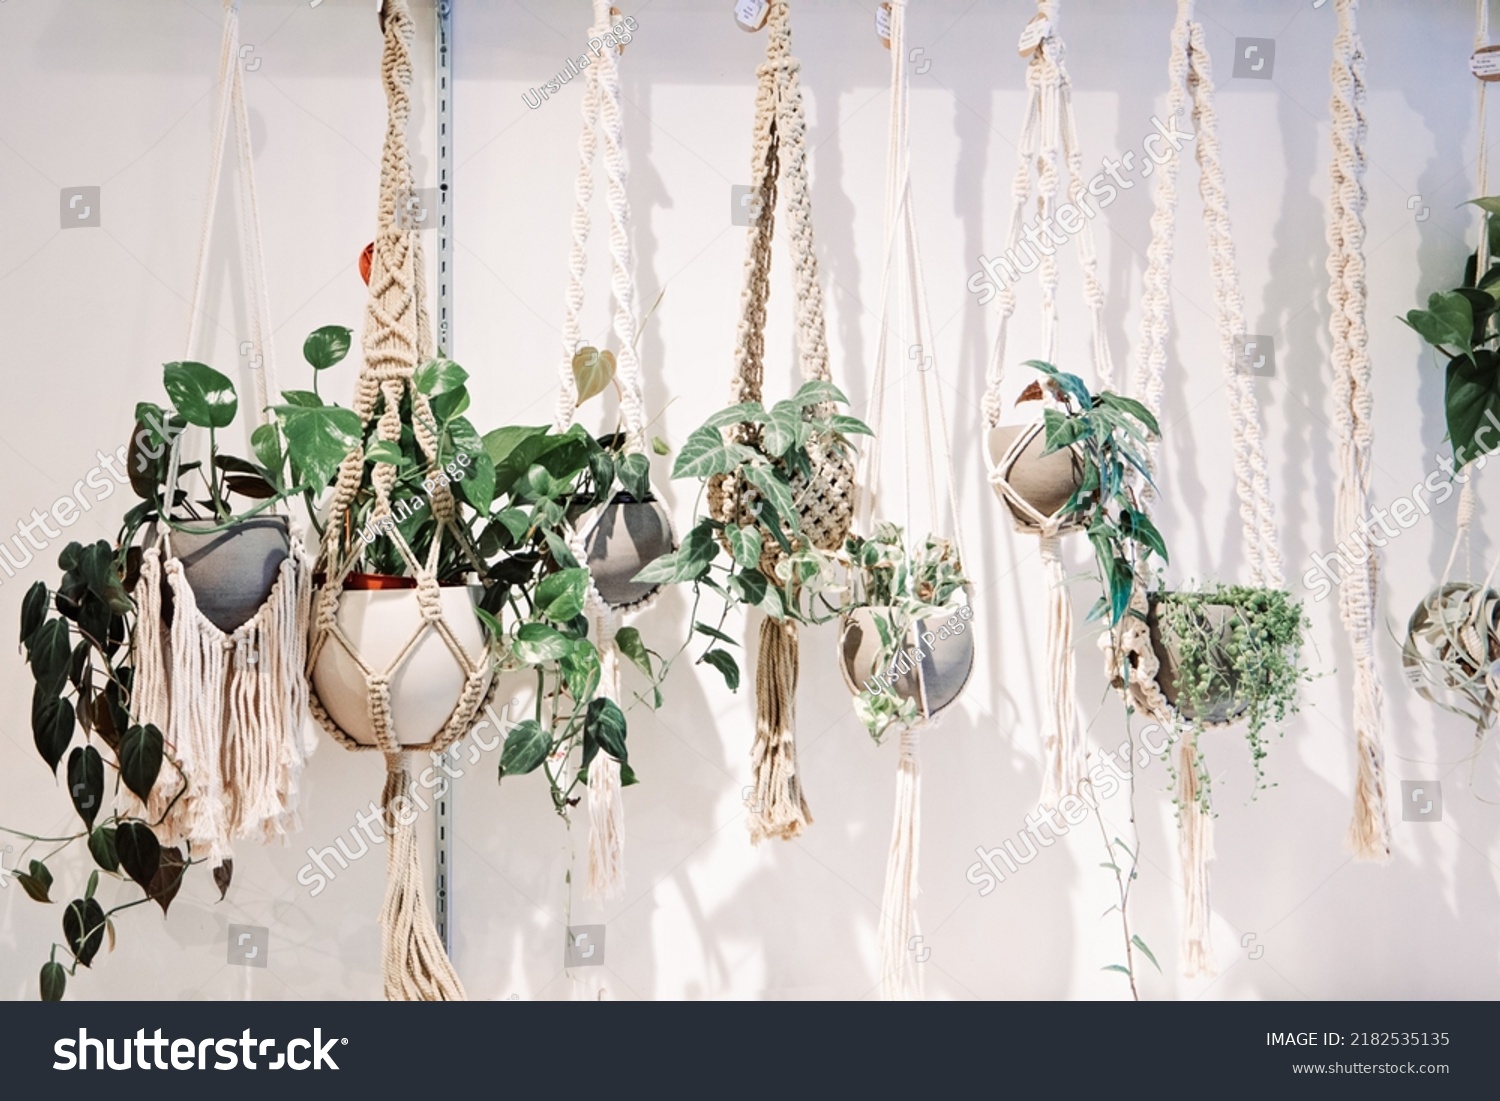 a row of hanging plants in bonehmian boho macrame plant holders against a white wall. #2182535135